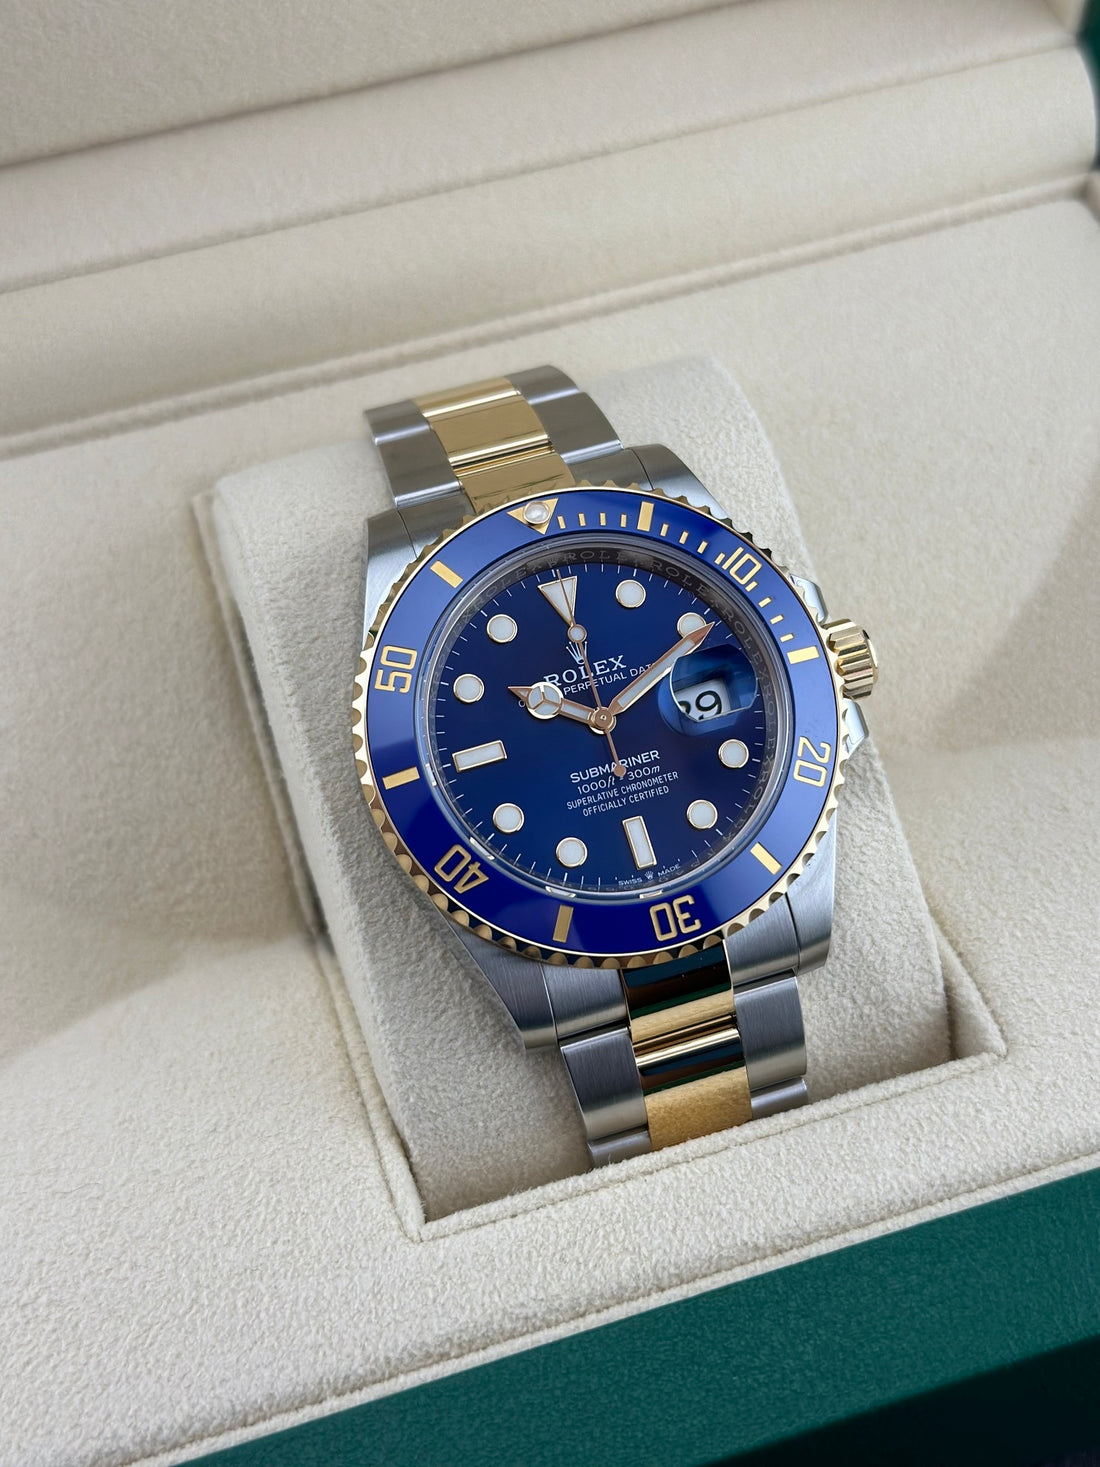 Rolex Stainless Steel Submariner Date 41mm Blue Ceramic Two Tone Yellow Gold Oyster 126613LB Bluesy